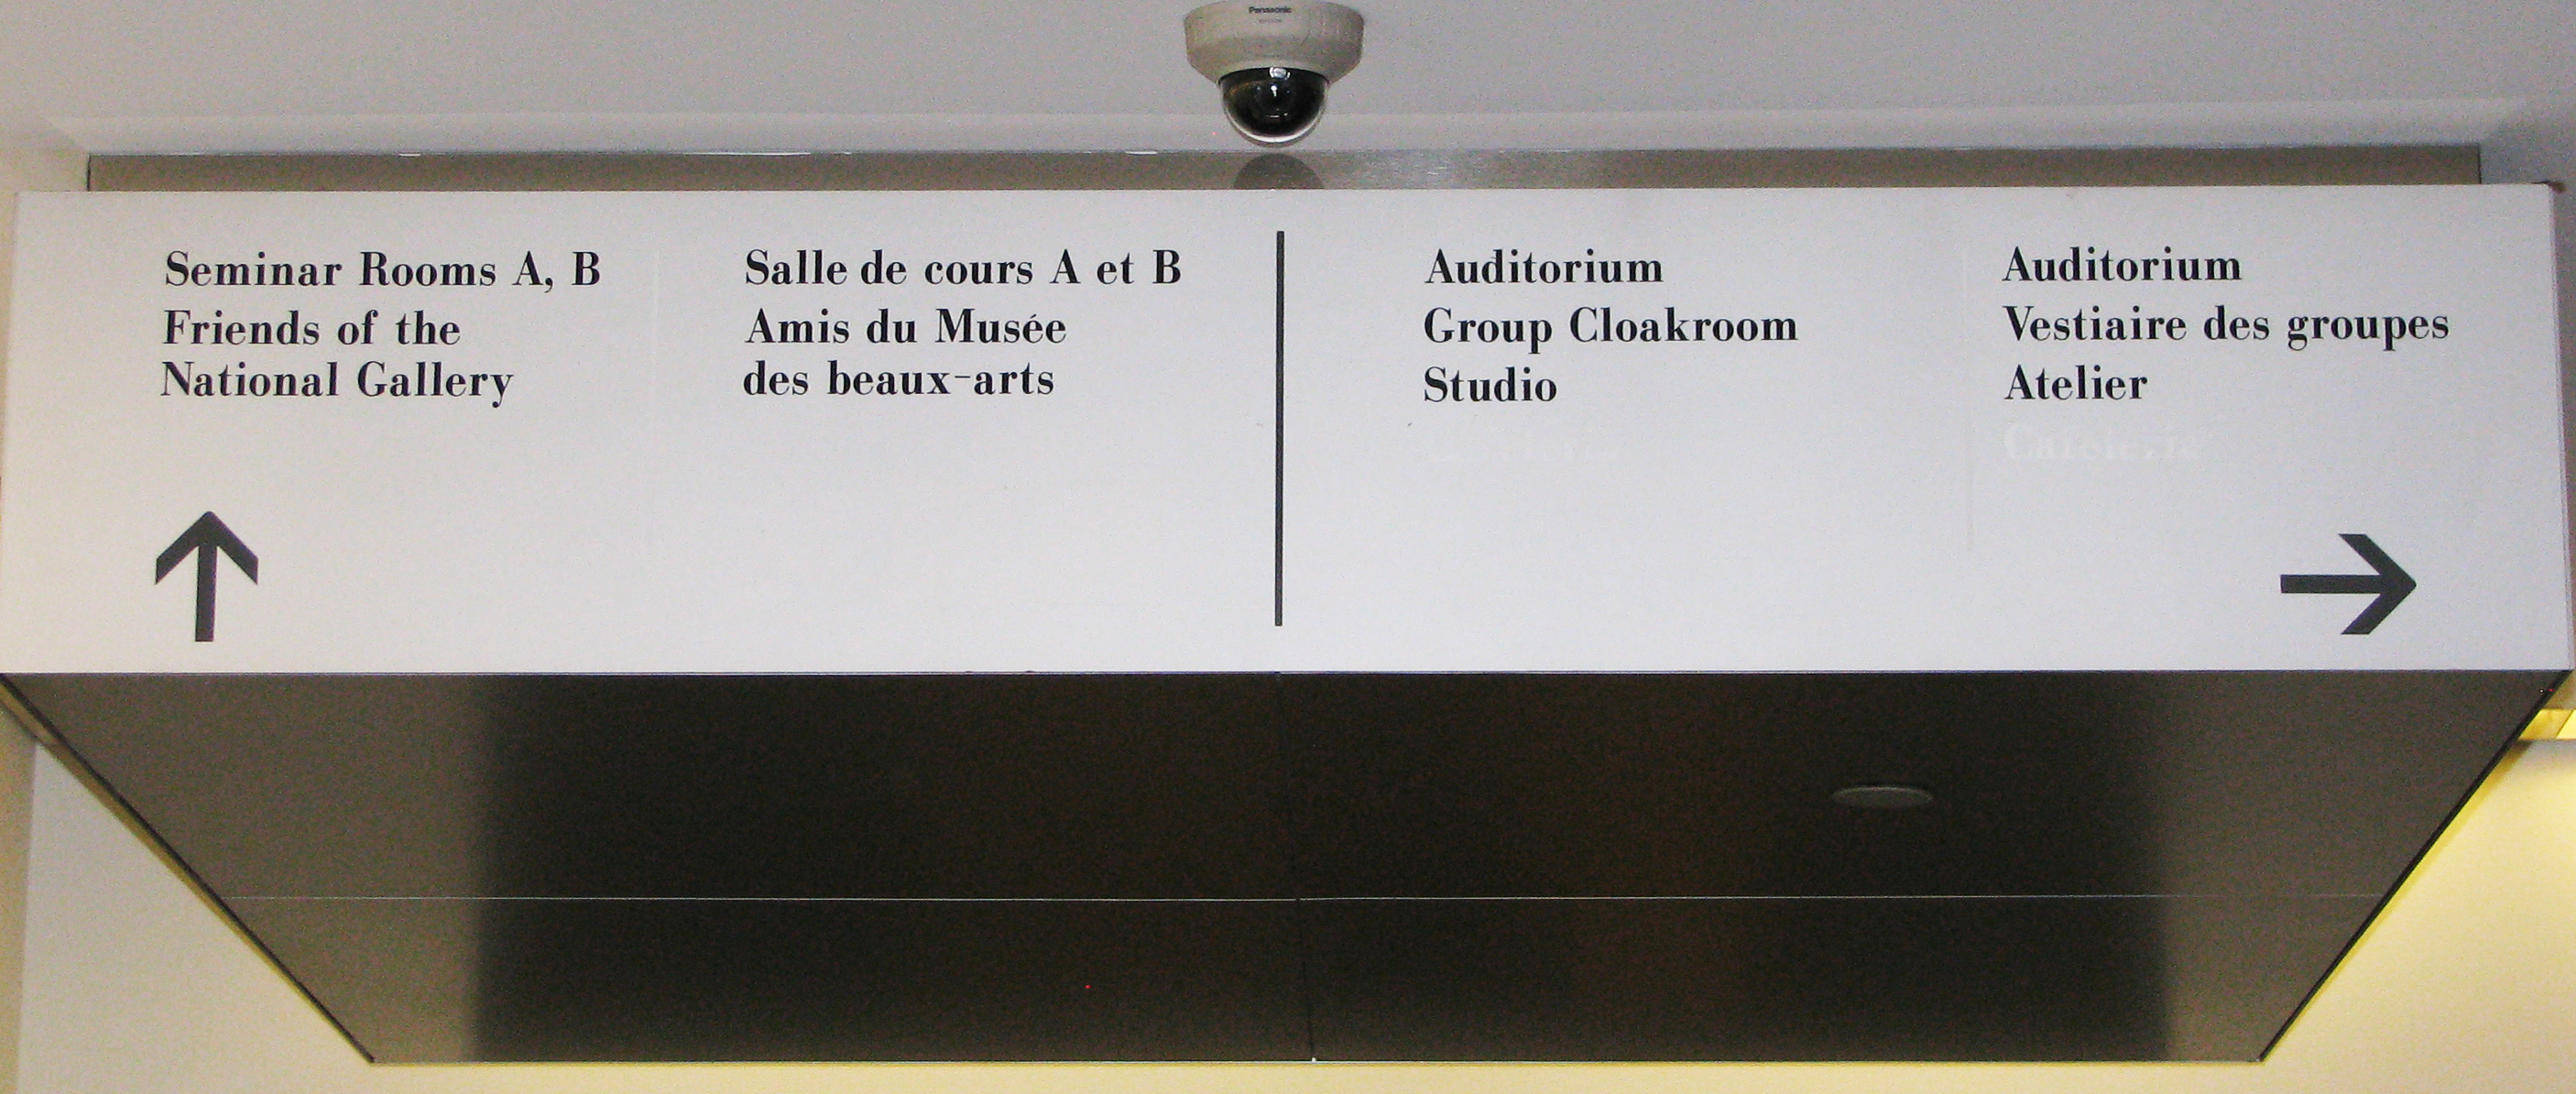 Image showing wayfinding signage in the interior of National Gallery of Canada